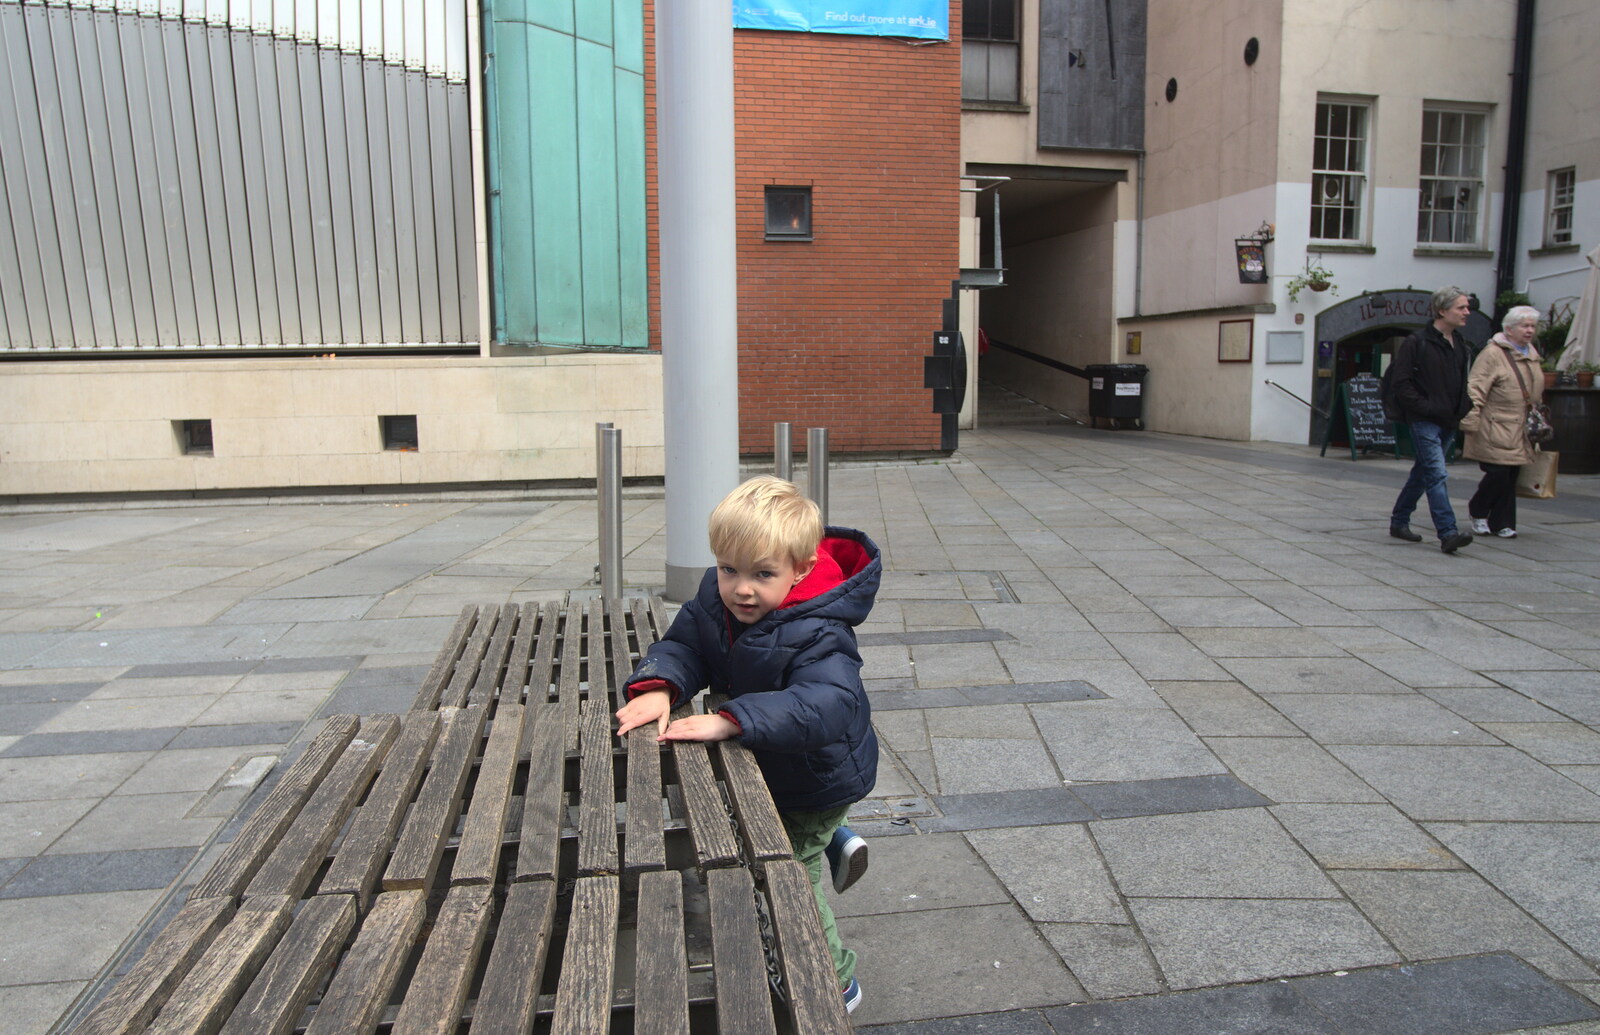 Harry on a bench from Temple Bar and Dun Laoghaire, Dublin, Ireland - 16th April 2015